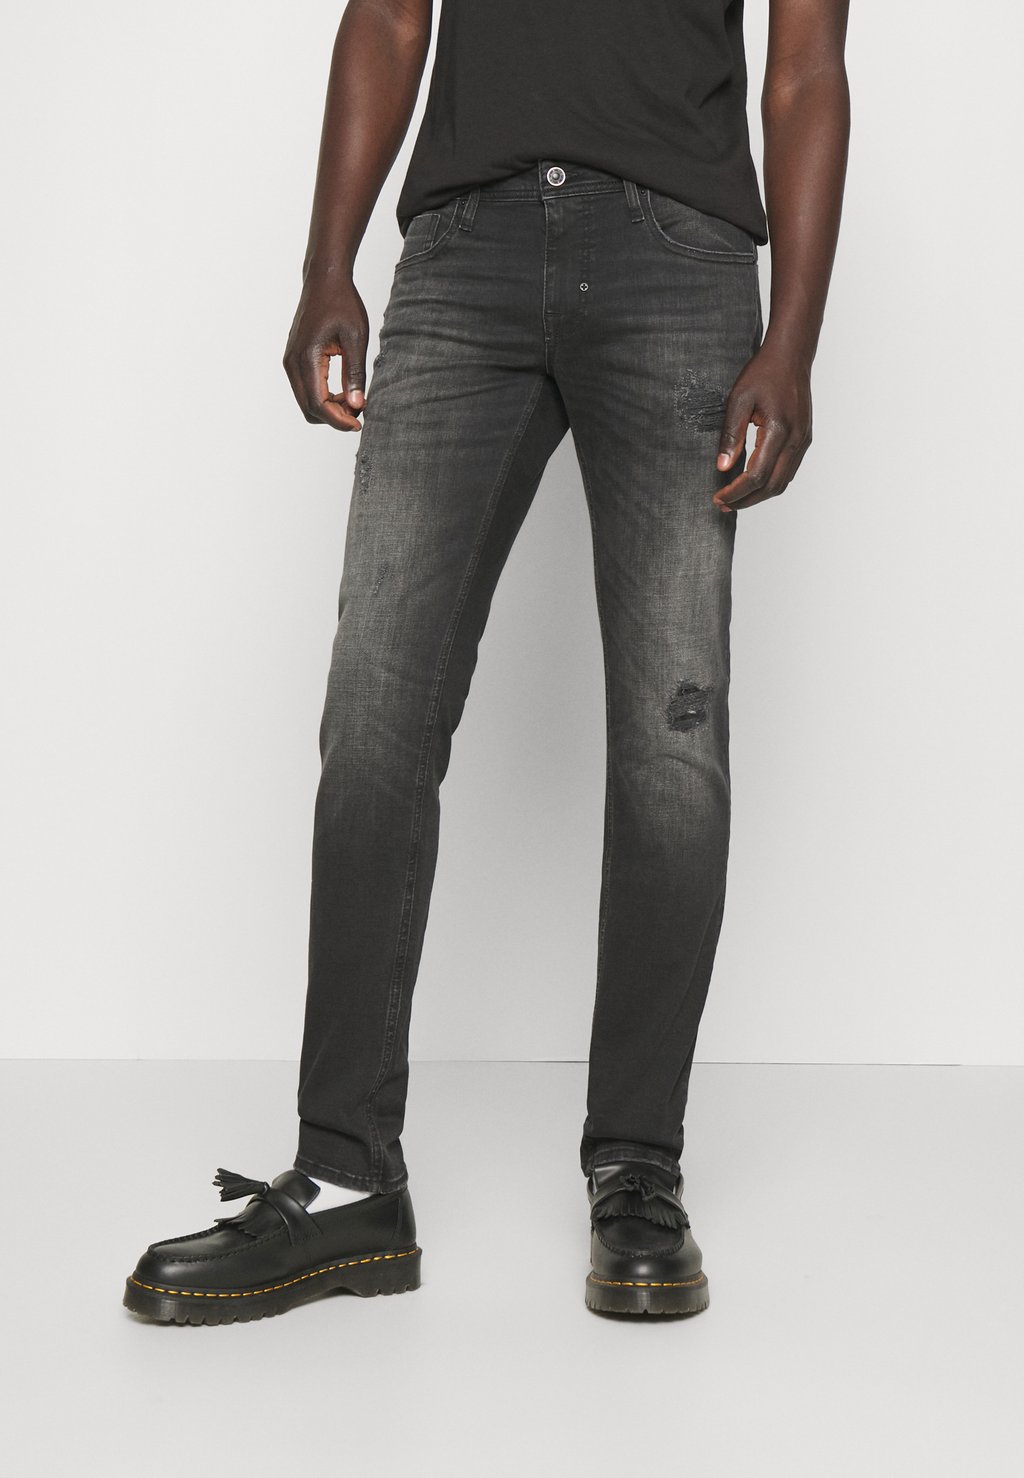 Джинсы Tapered Fit Ozzy Tapered Fit Jeans In Black Wash Stretch Denim Antony Morato, цвет black denim джинсы tapered fit kurt antony morato цвет black